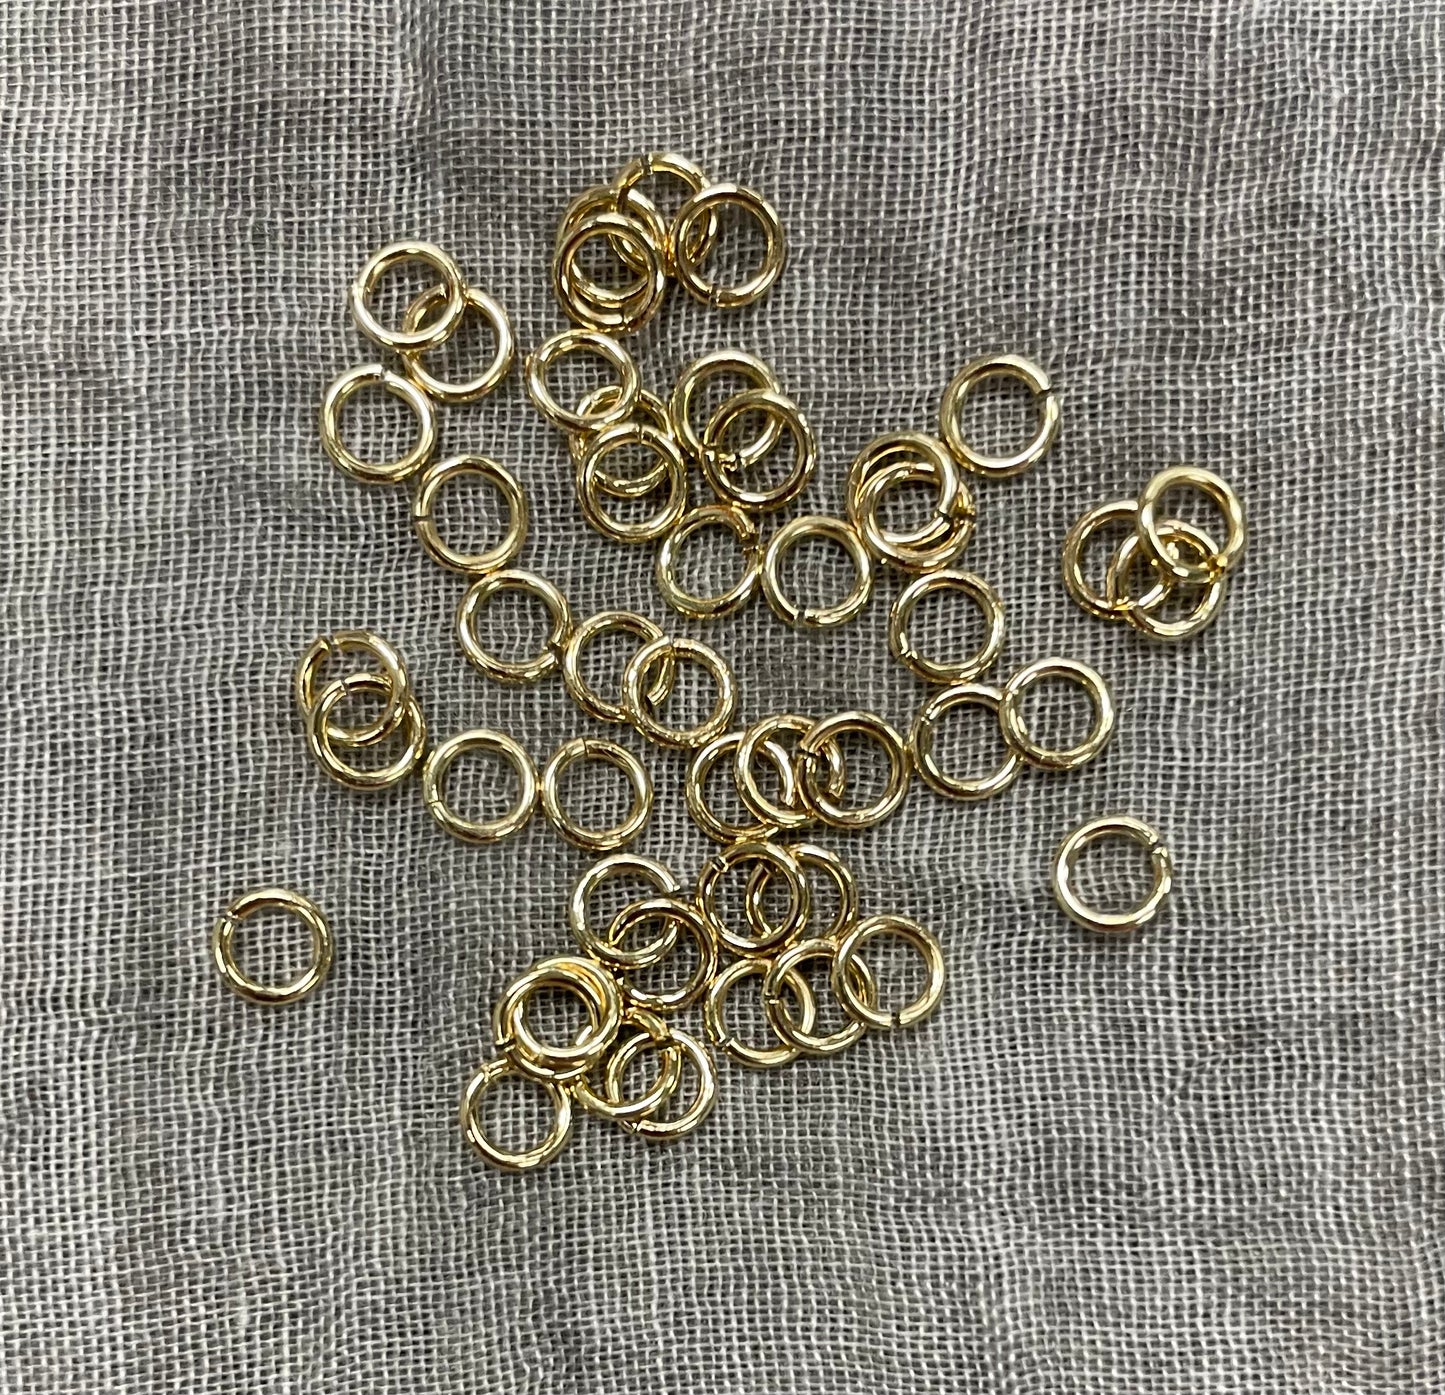 6 mm Open Jump Ring: 18 Gauge, Shiny Gold, 50 pieces